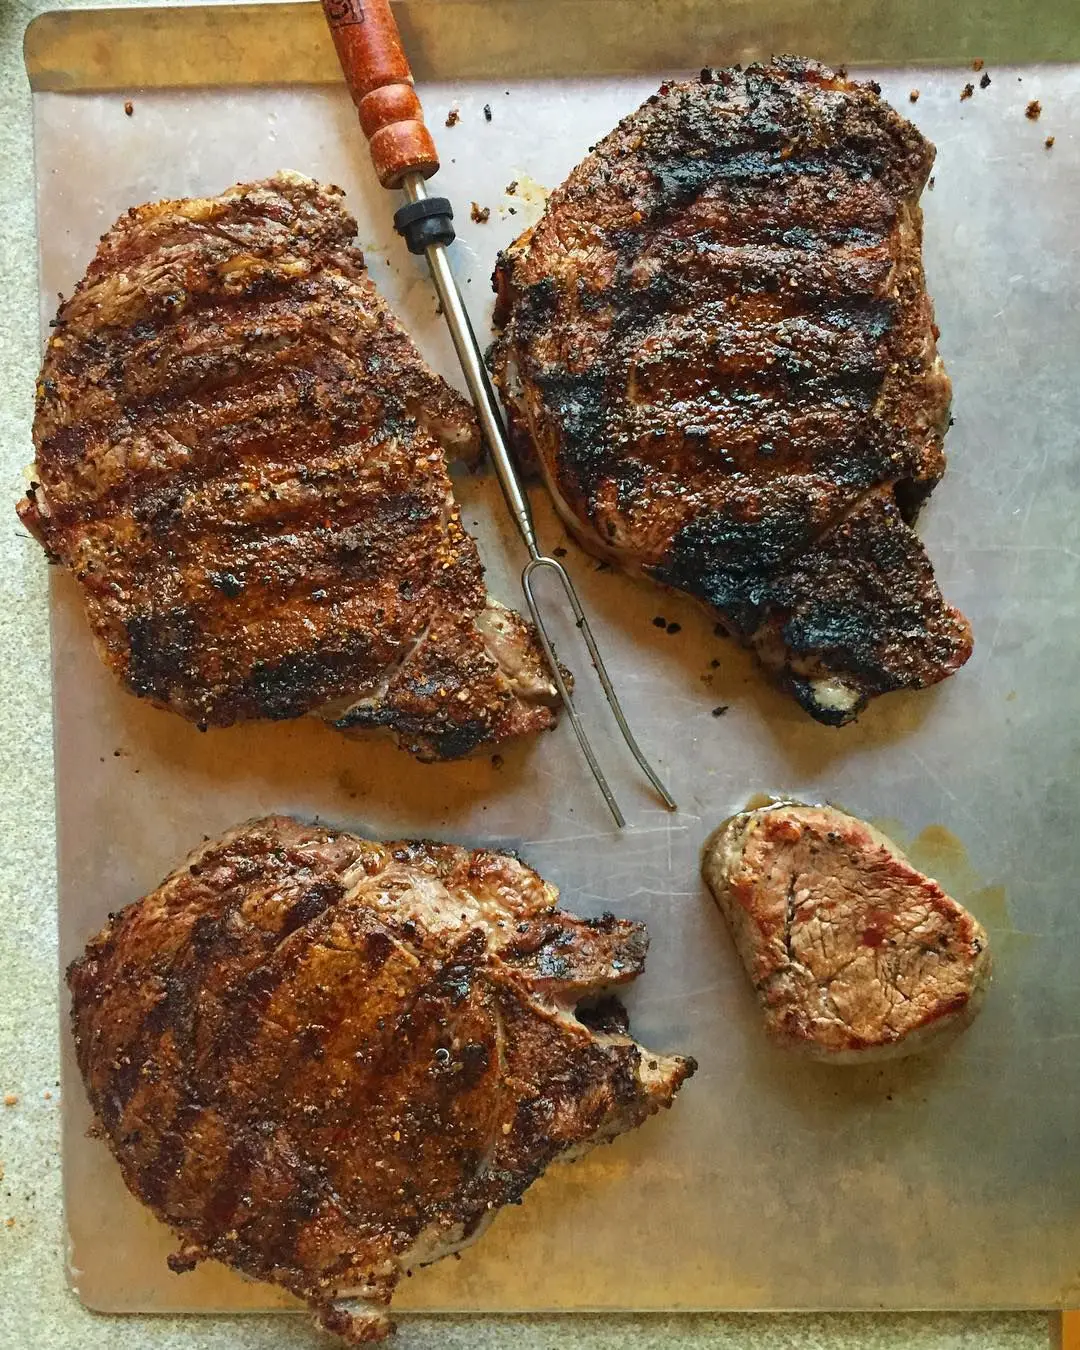 Food morning people. Rise and shine to these beautifully grilled ribeye ...